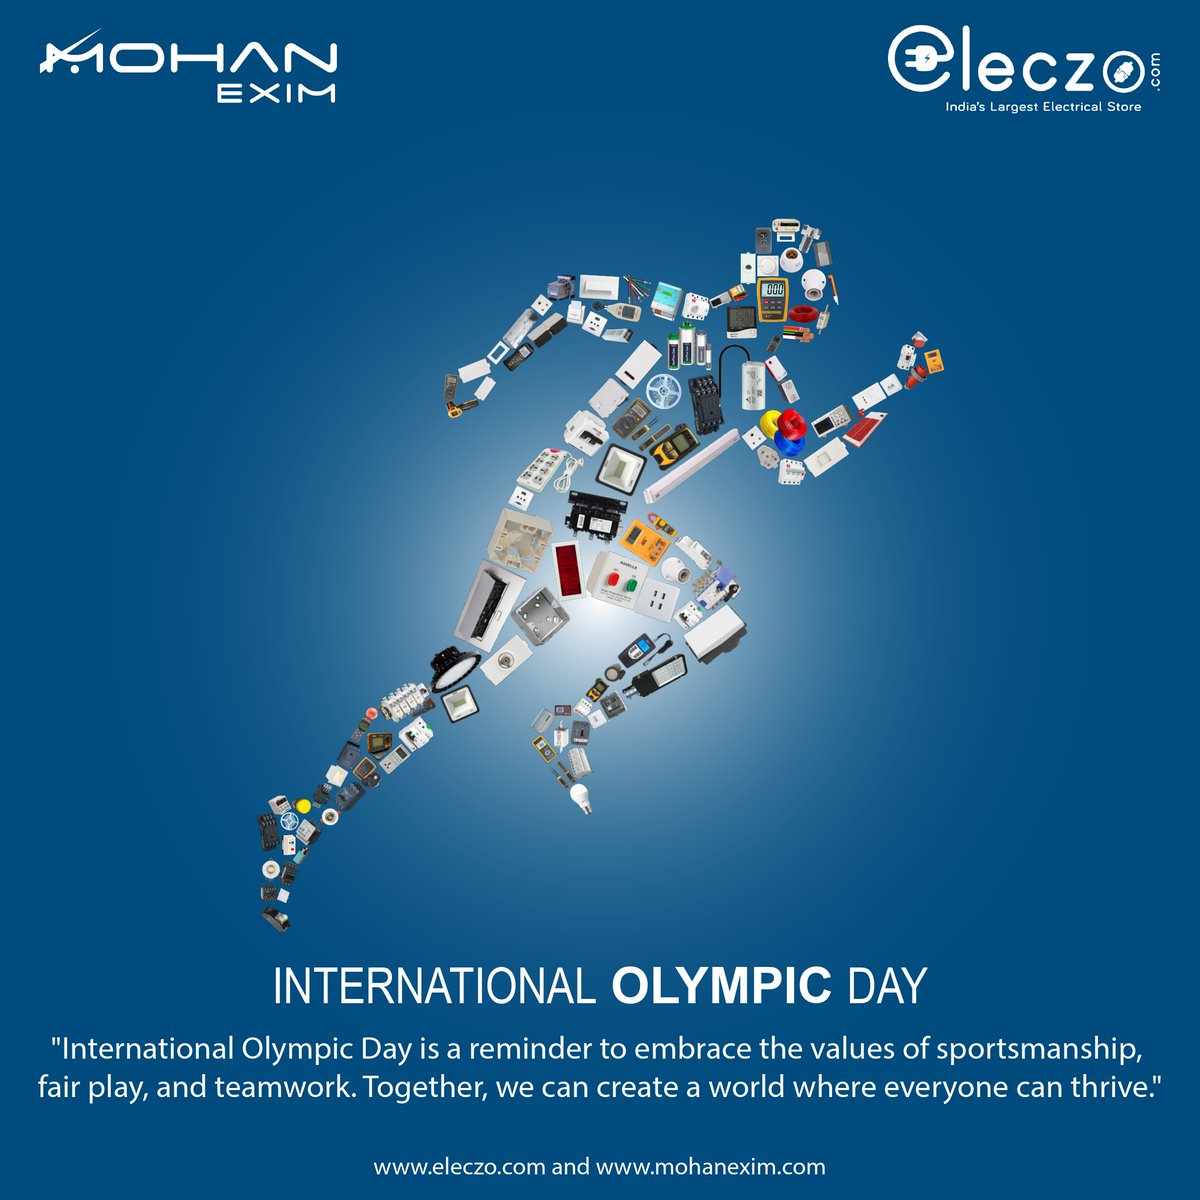 Inspired by the Olympic ideals, we strive for greatness every day at Eleczo. Happy International Olympic Day!

#Eleczo #InternationalOlympicDay #OlympicSpirit #OlympicDayCelebration #InspireGreatness #OlympicValues #TeamworkAndUnity #ChampionMindset